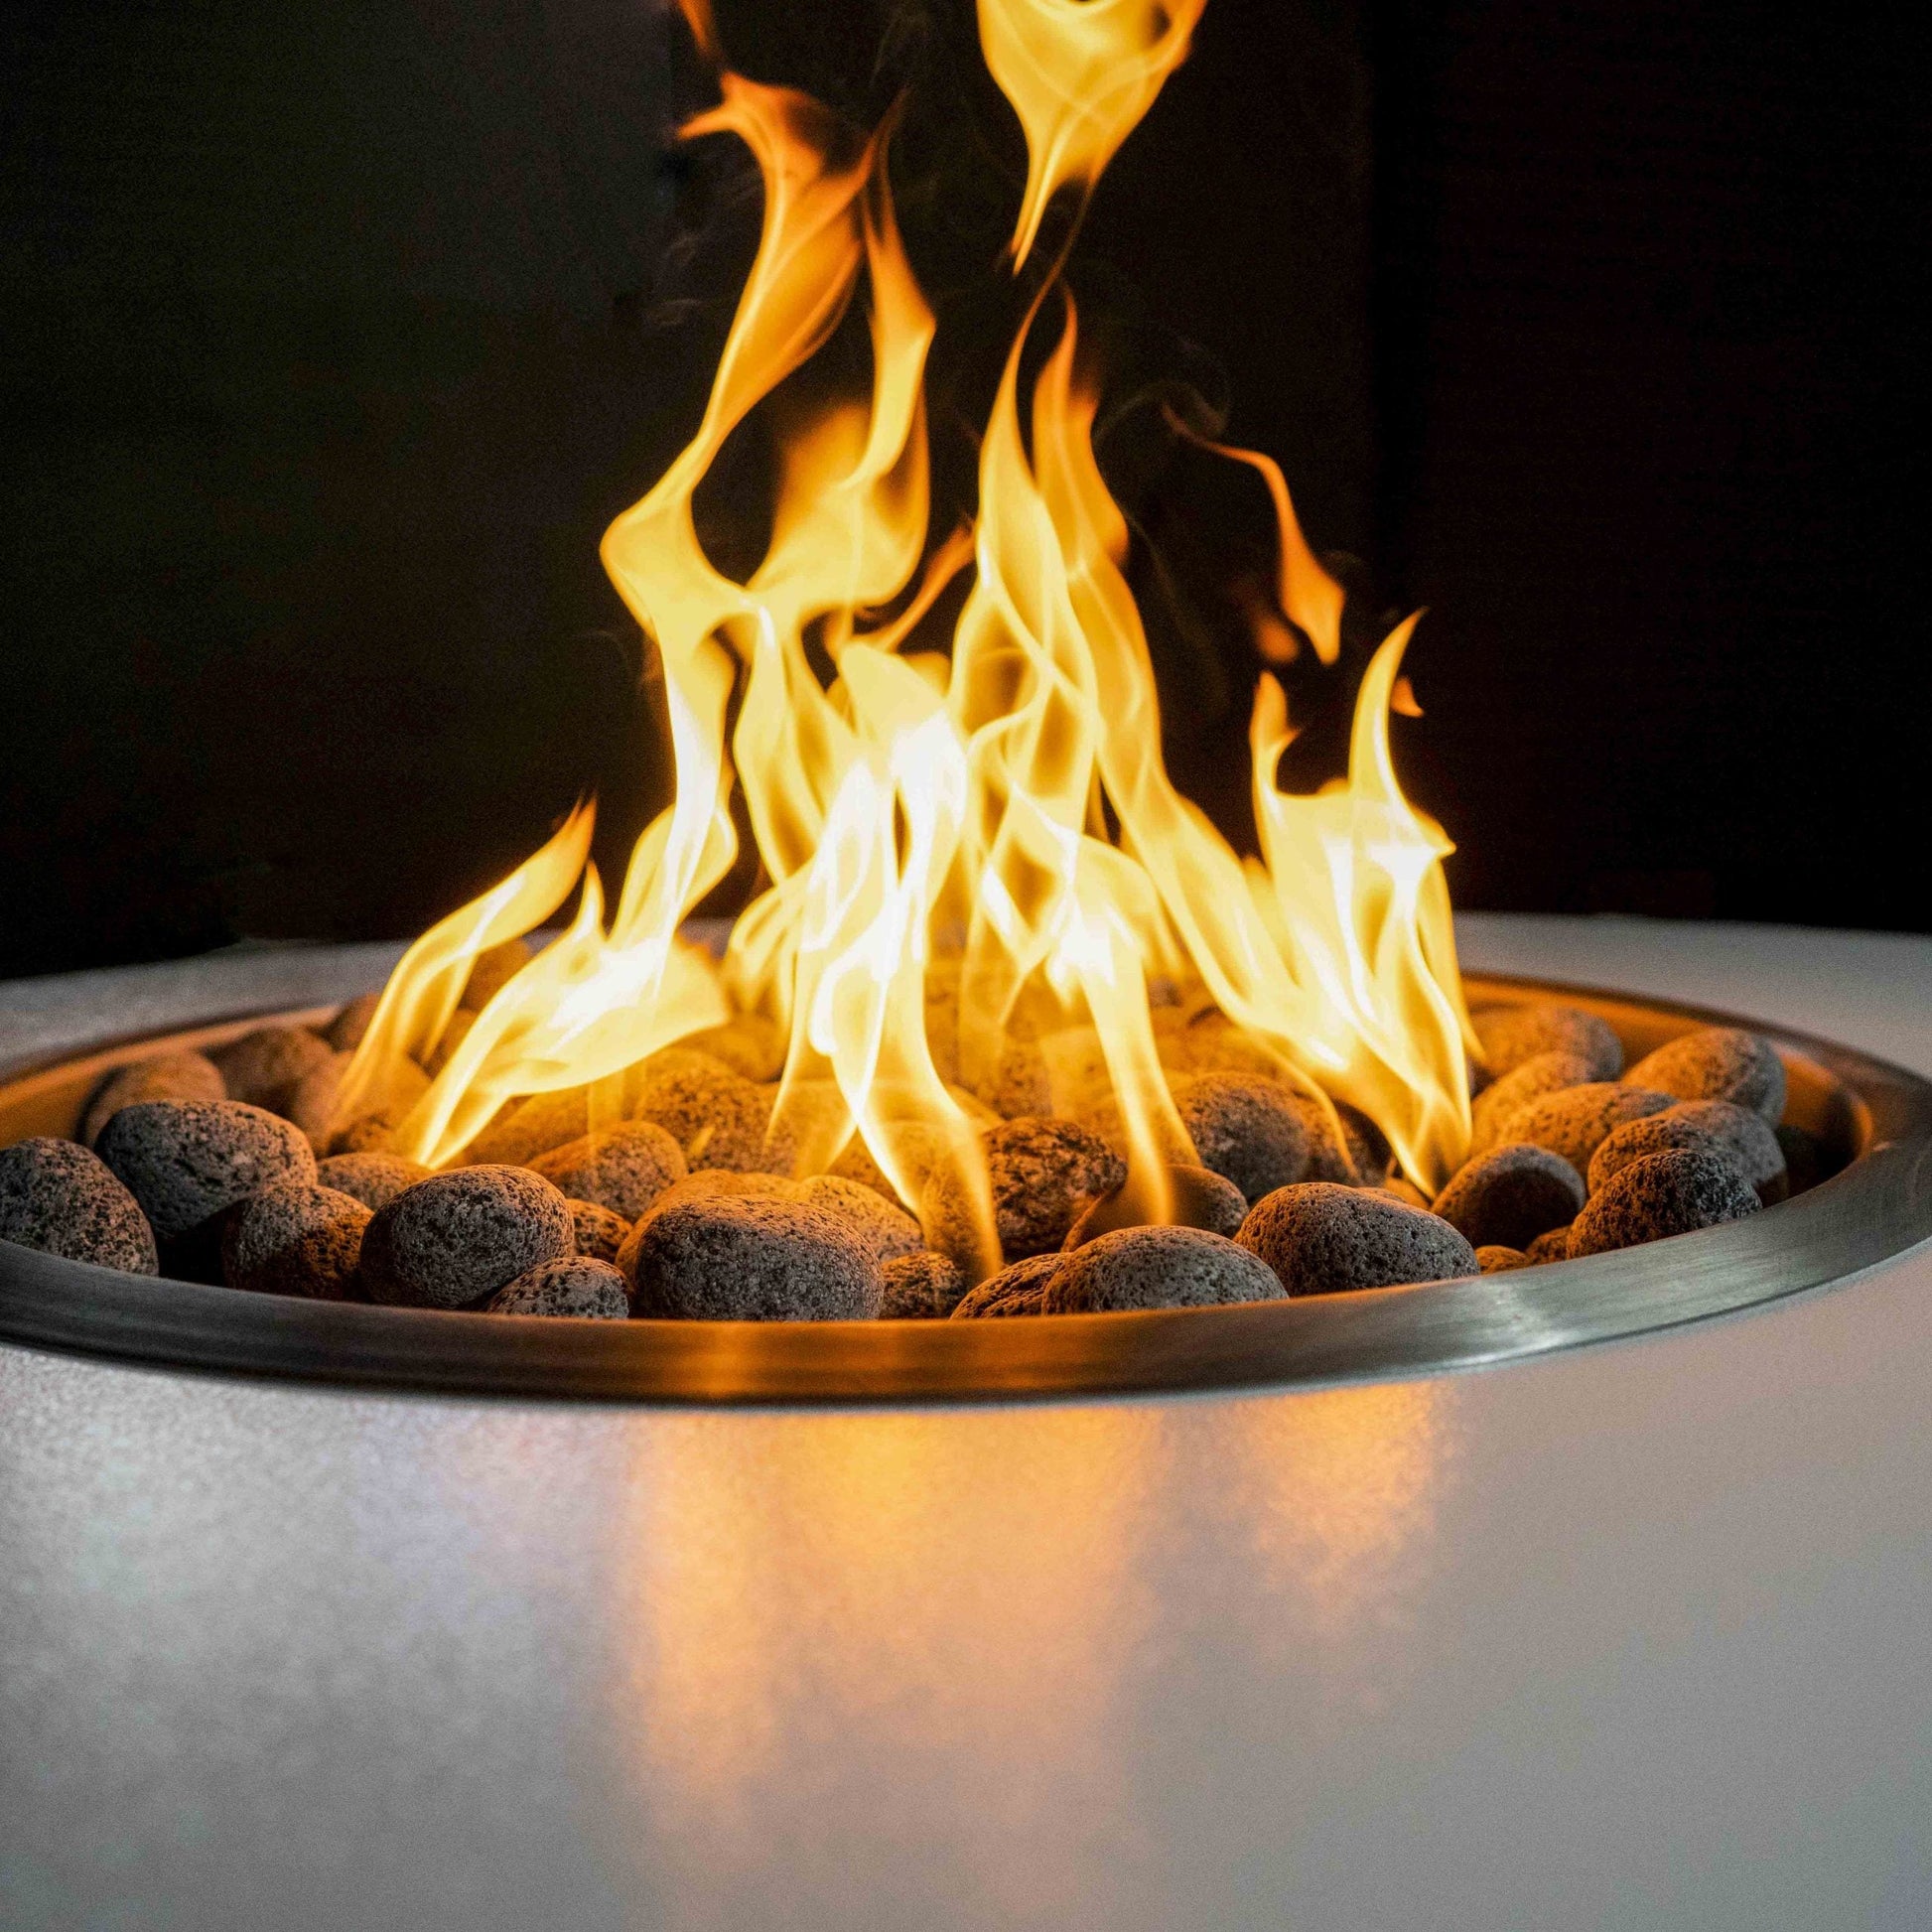 The Outdoor Plus Isla 60" Stainless Steel Natural Gas Fire Pit with 110V Electronic Ignition